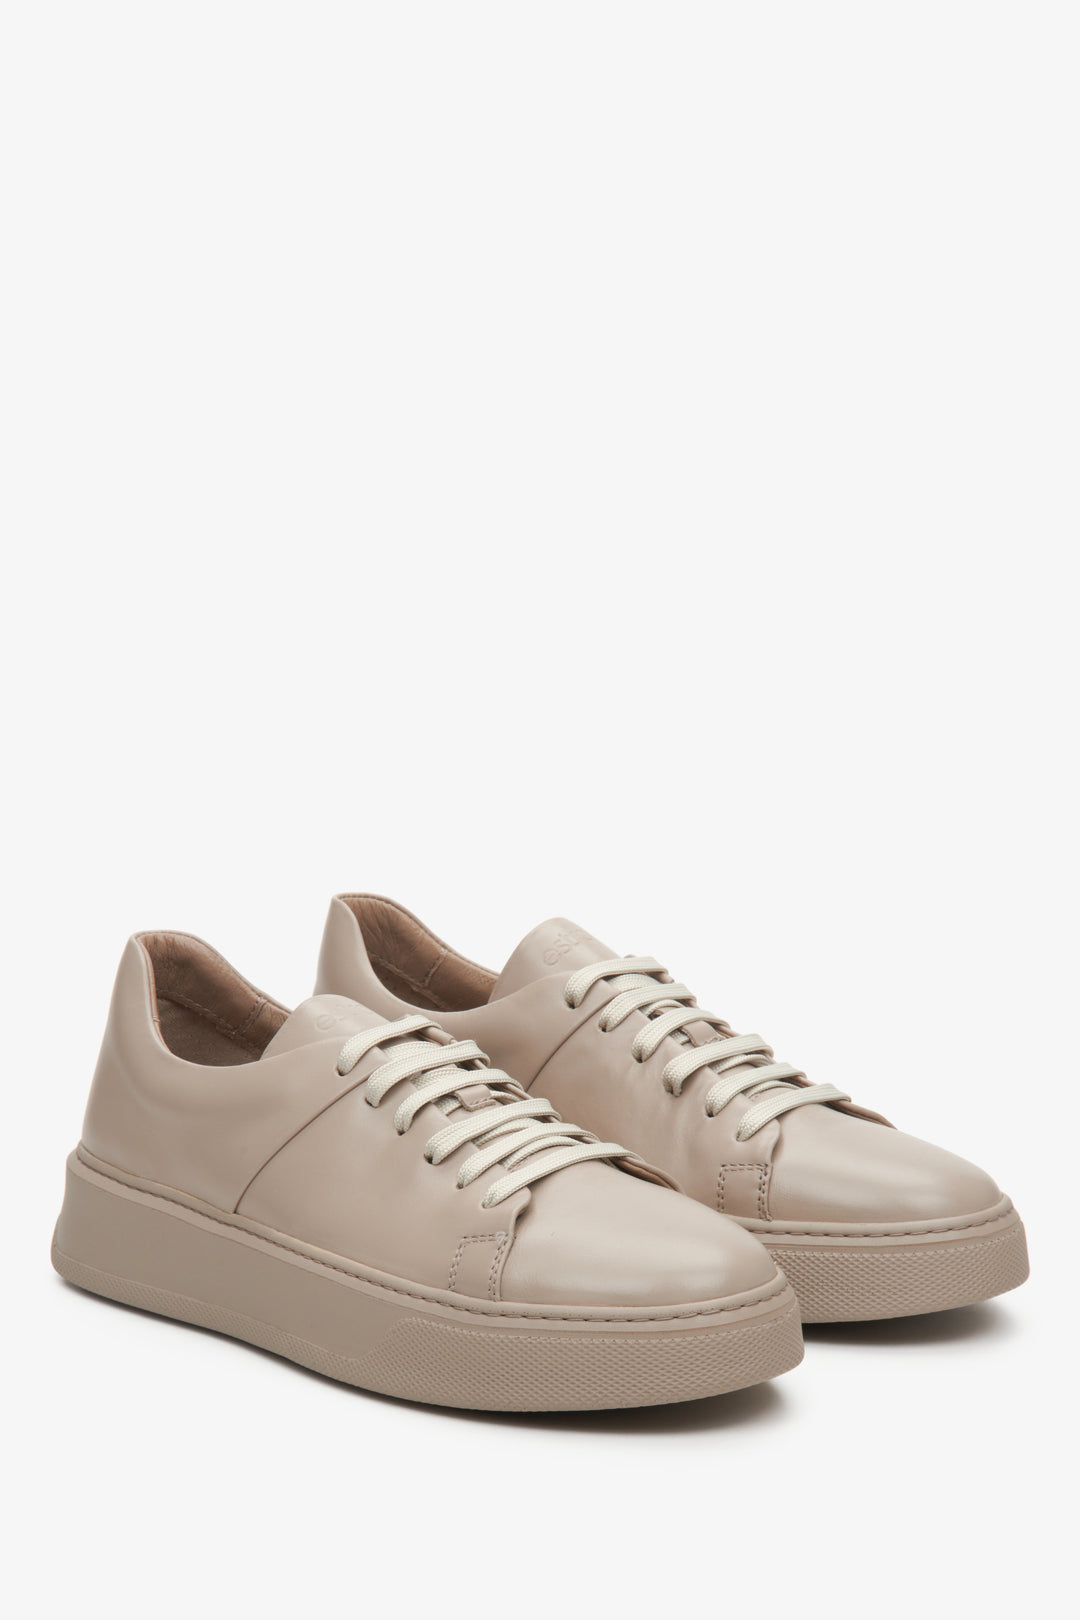 Women's leather sneakers in beige with laces - presentation of the toe and side seam of the shoe.